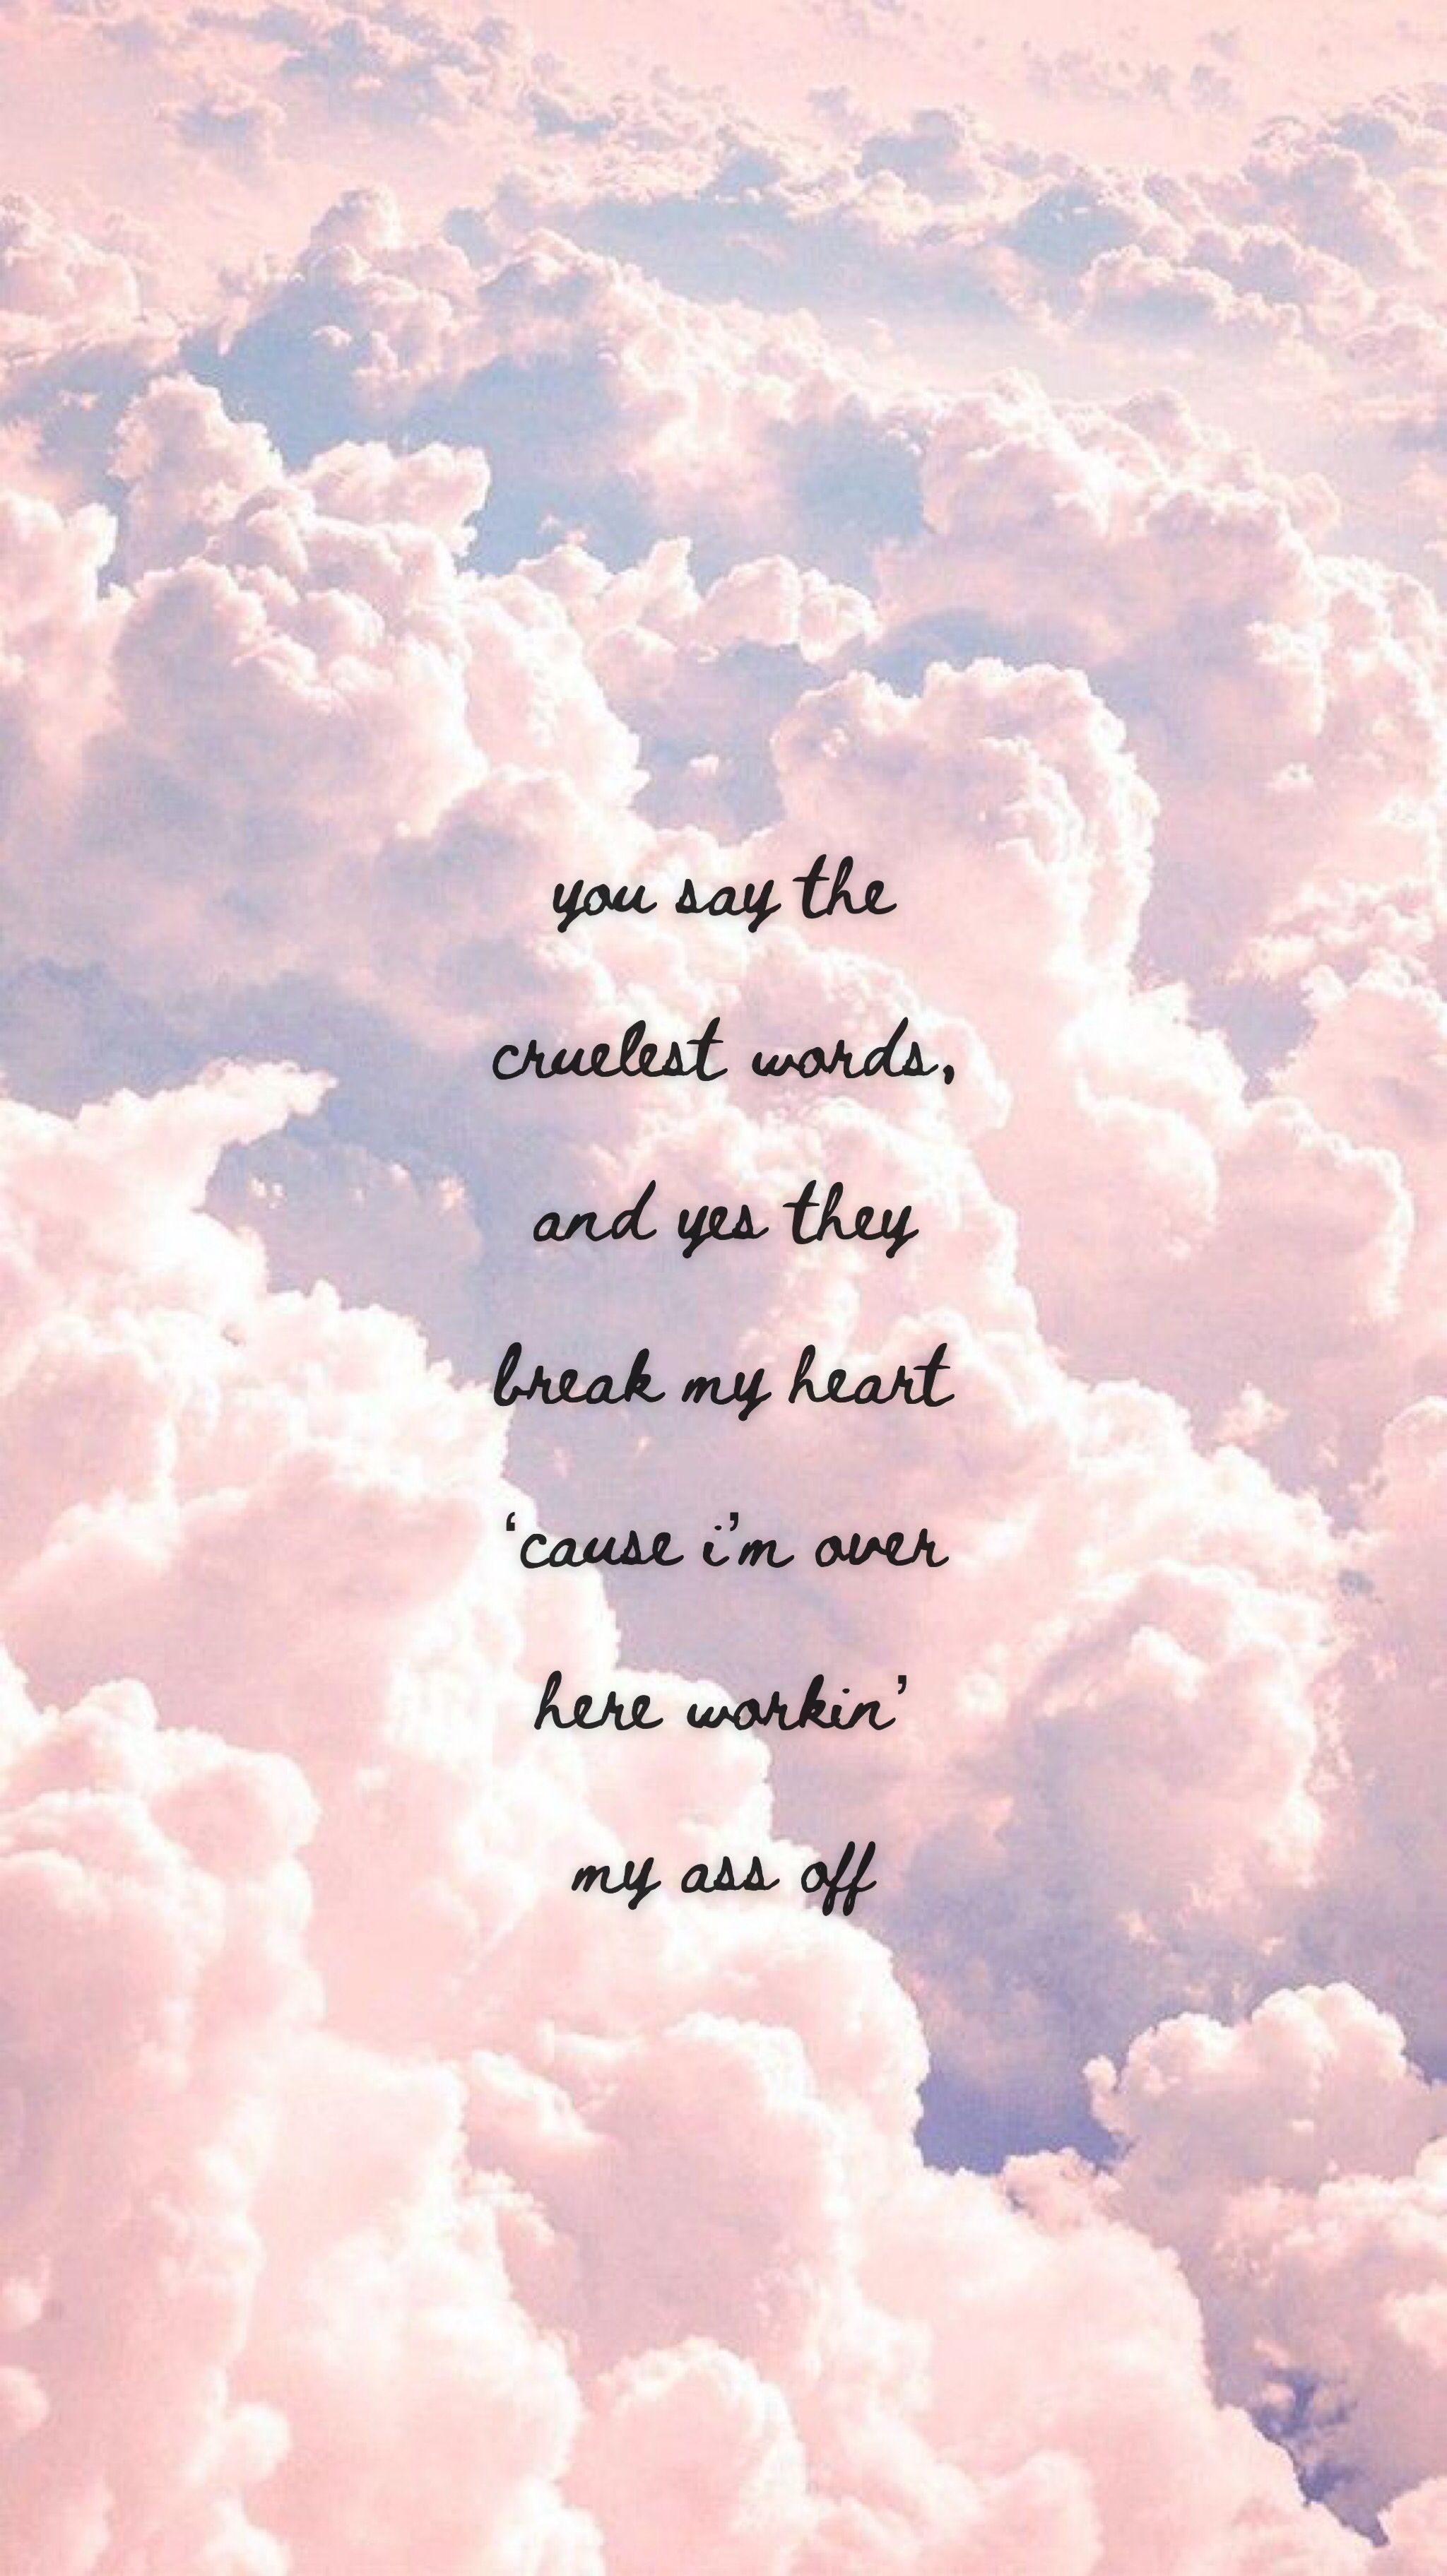 A quote on a pink and white cloud background - Melanie Martinez